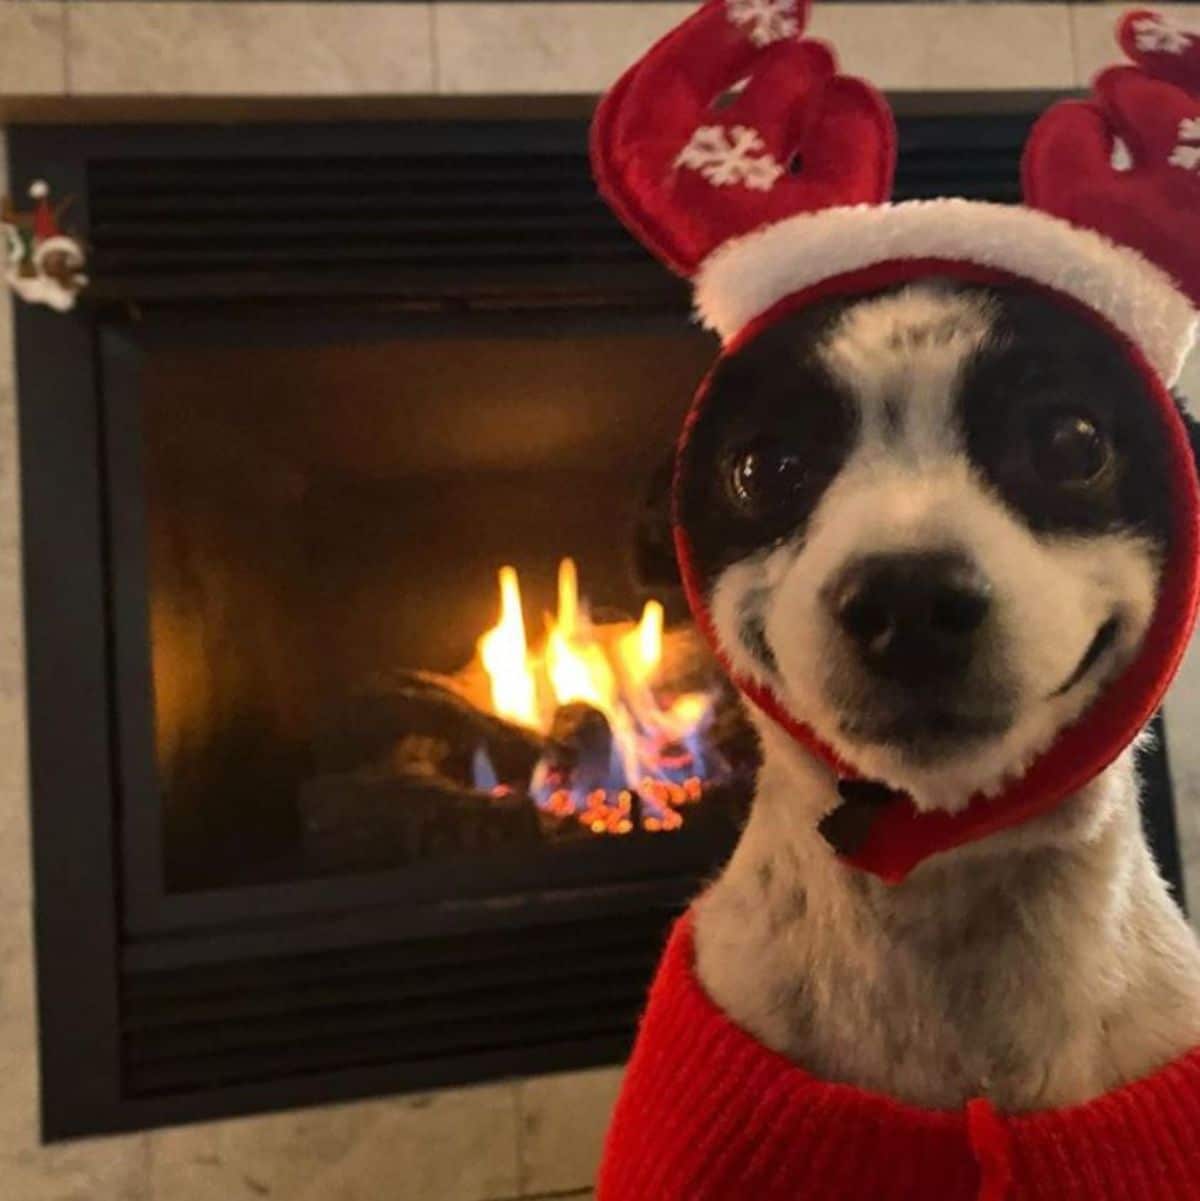 black and white dog who looks like he's smiling wearing a red and white cloth reindeer antlers hat and a red sweater